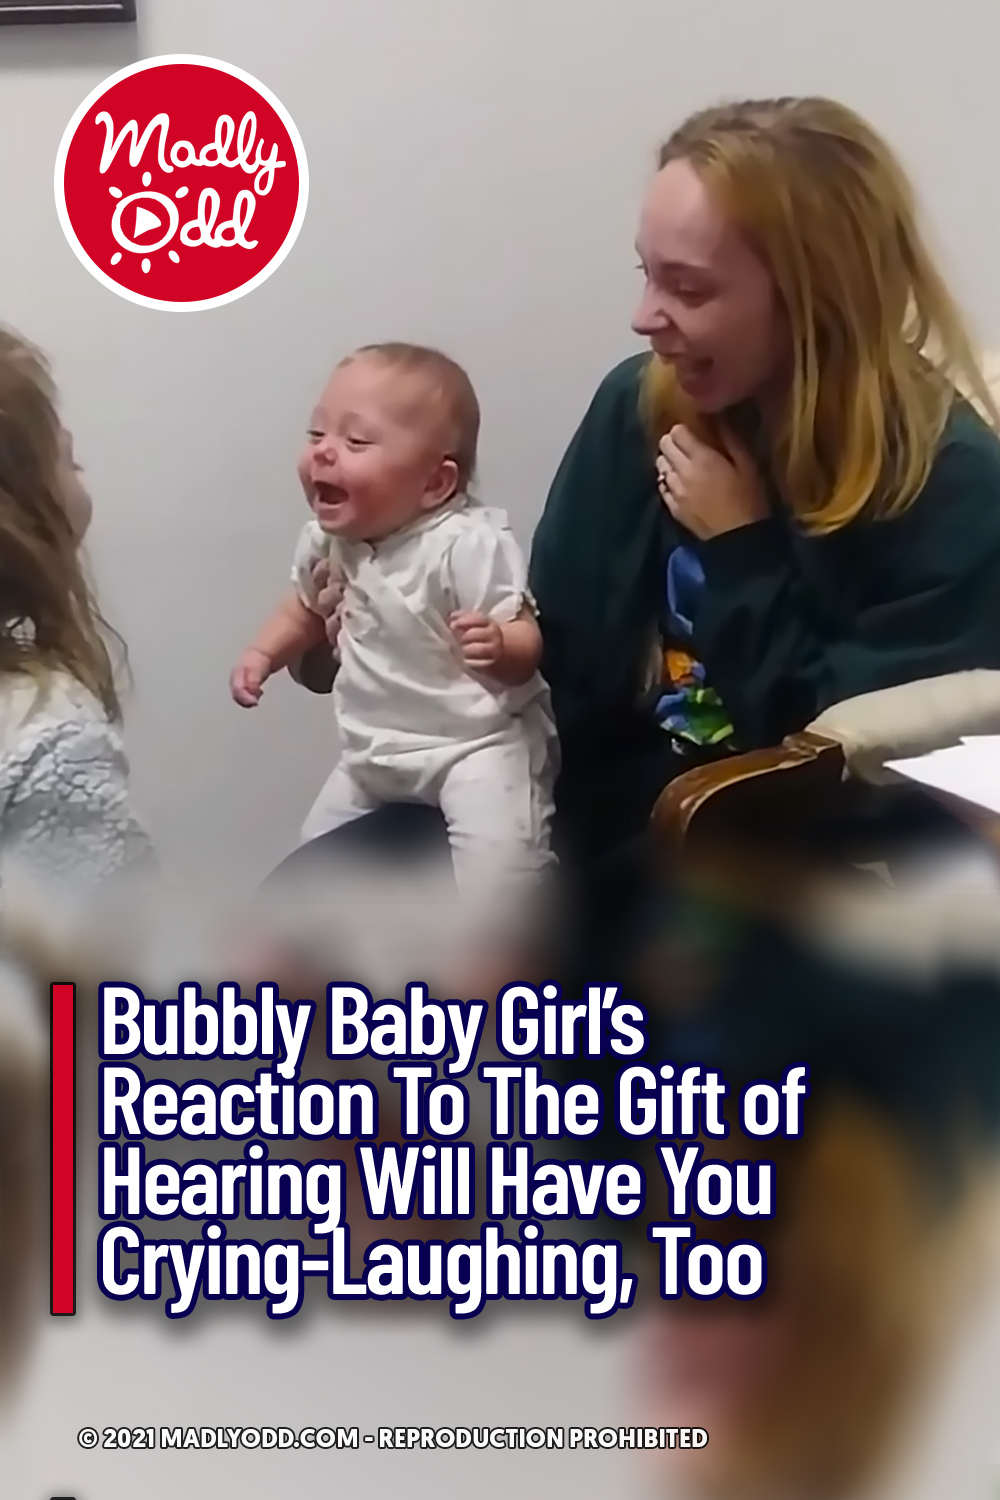 Bubbly Baby Girl’s Reaction To The Gift of Hearing Will Have You Crying-Laughing, Too